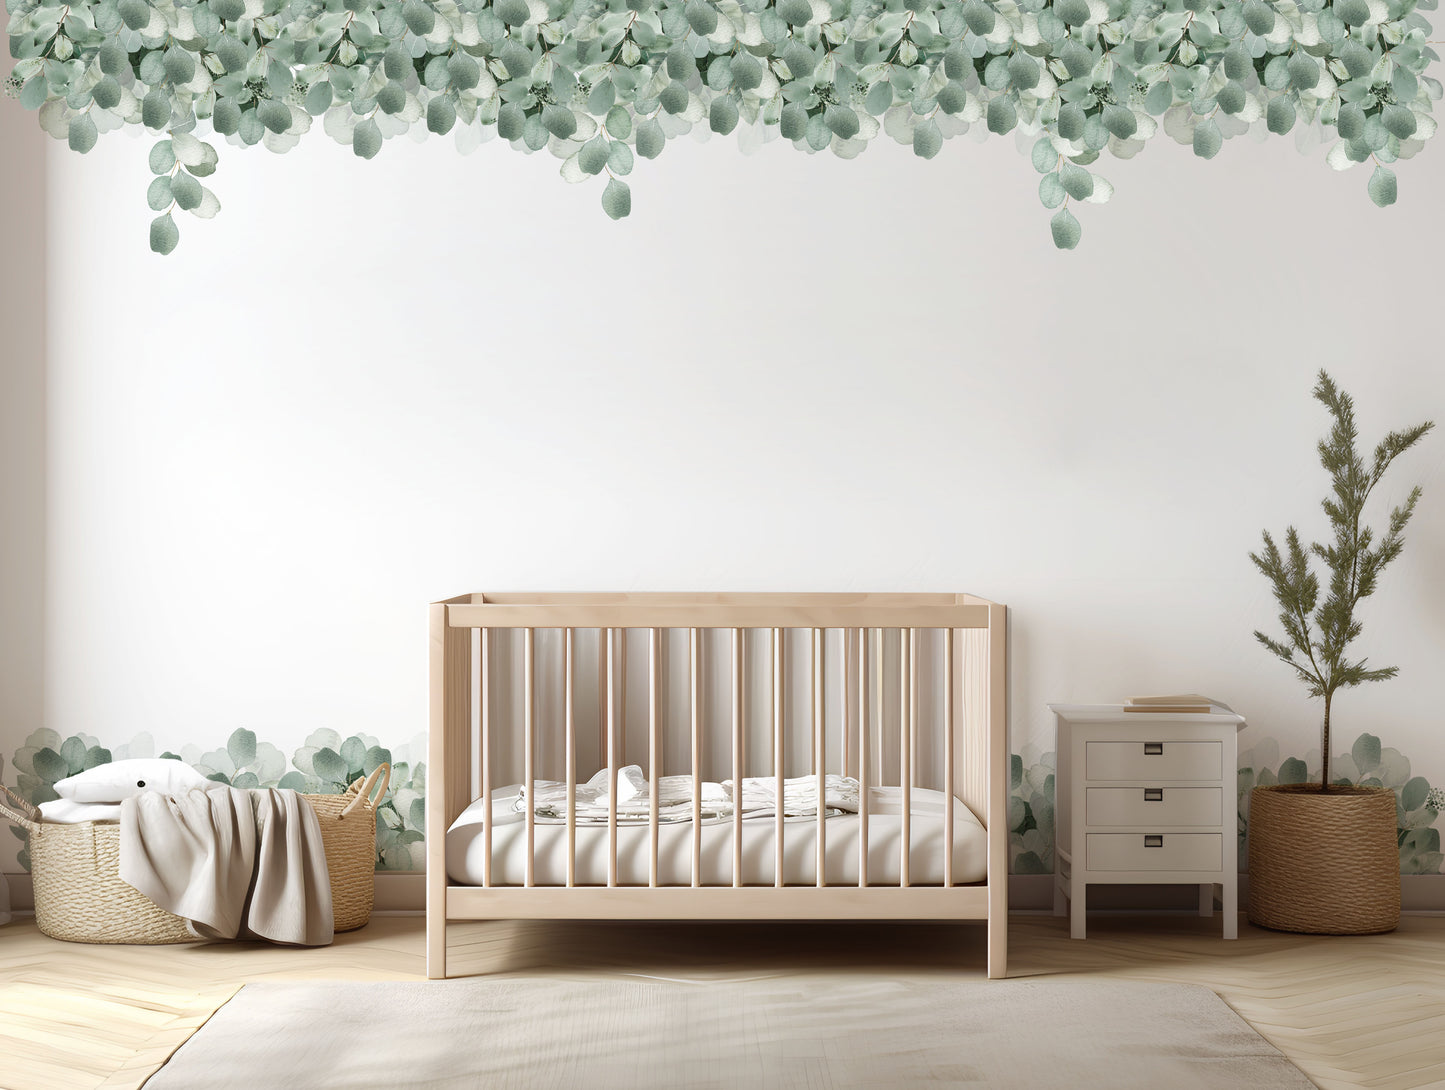 Tropical Leaf Wall Decal Border - Wall Decals - Fable and Fawn 